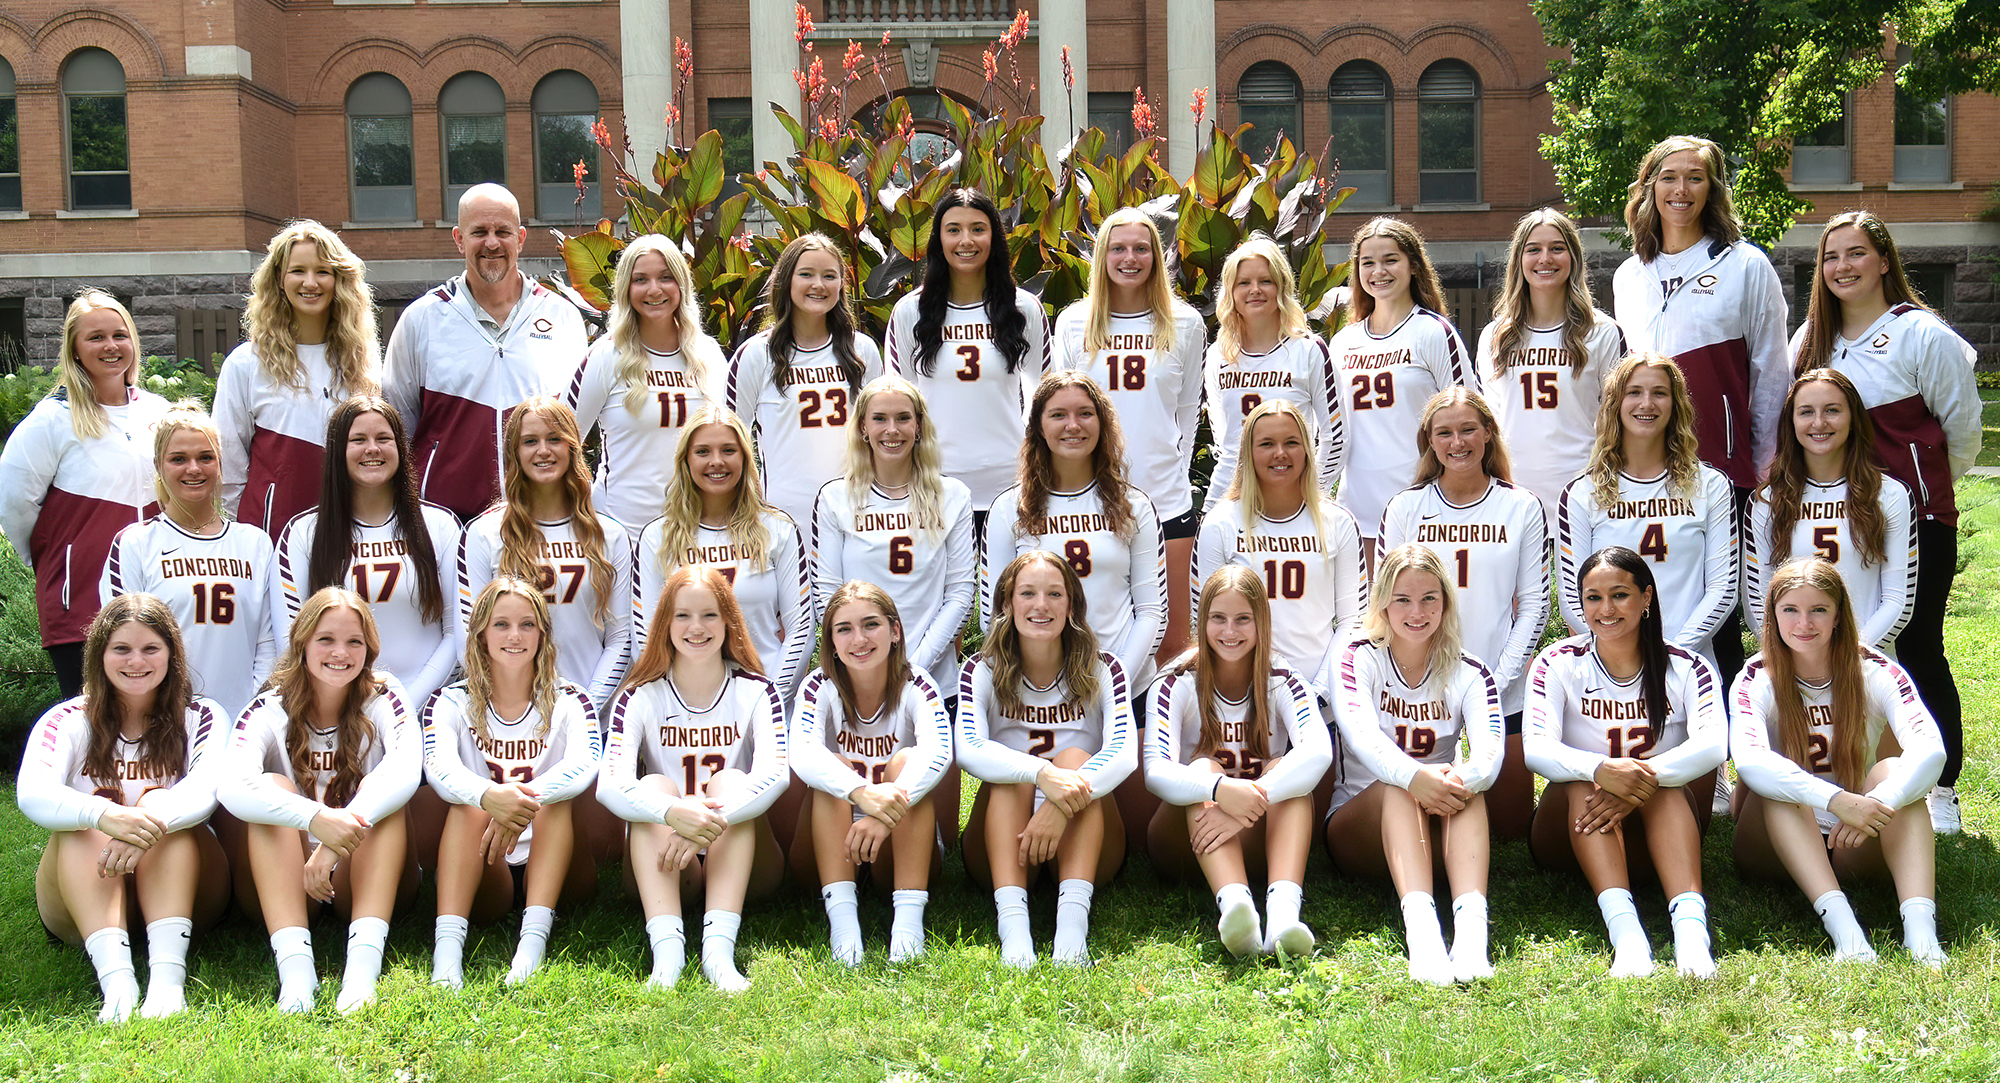 Concordia earned the American Volleyball Coaches Association (AVCA) Team Academic Award as sponsored by INTENT.